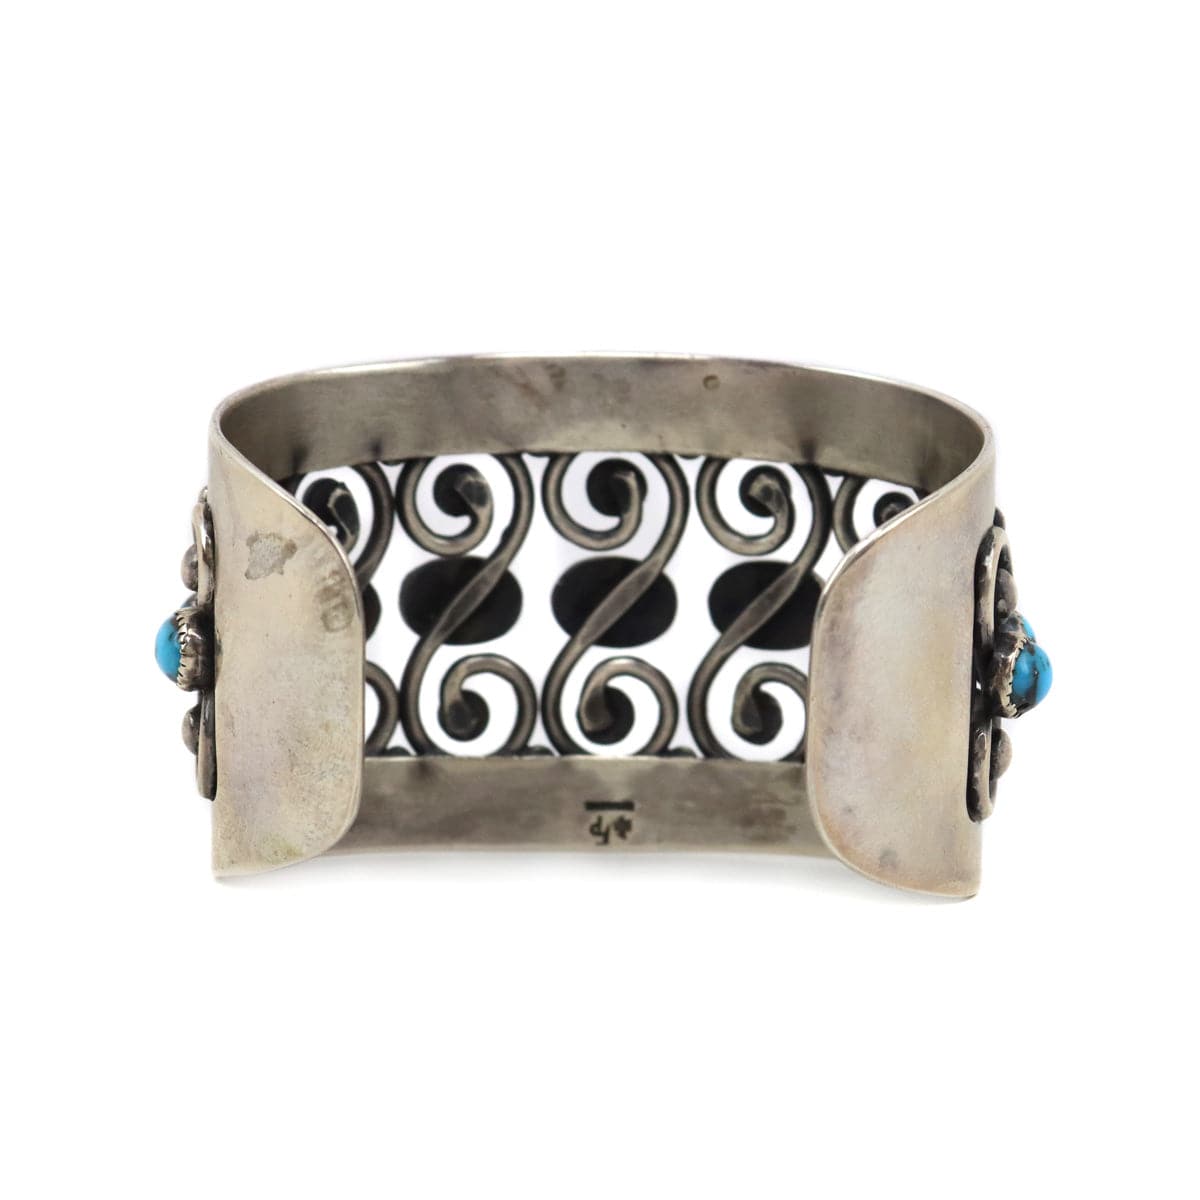 Frank Patania Sr. (1898-1964) - Persian Turquoise and Sterling Silver Bracelet c. 1950s, size 7.25 (J91699-1022-020) 2